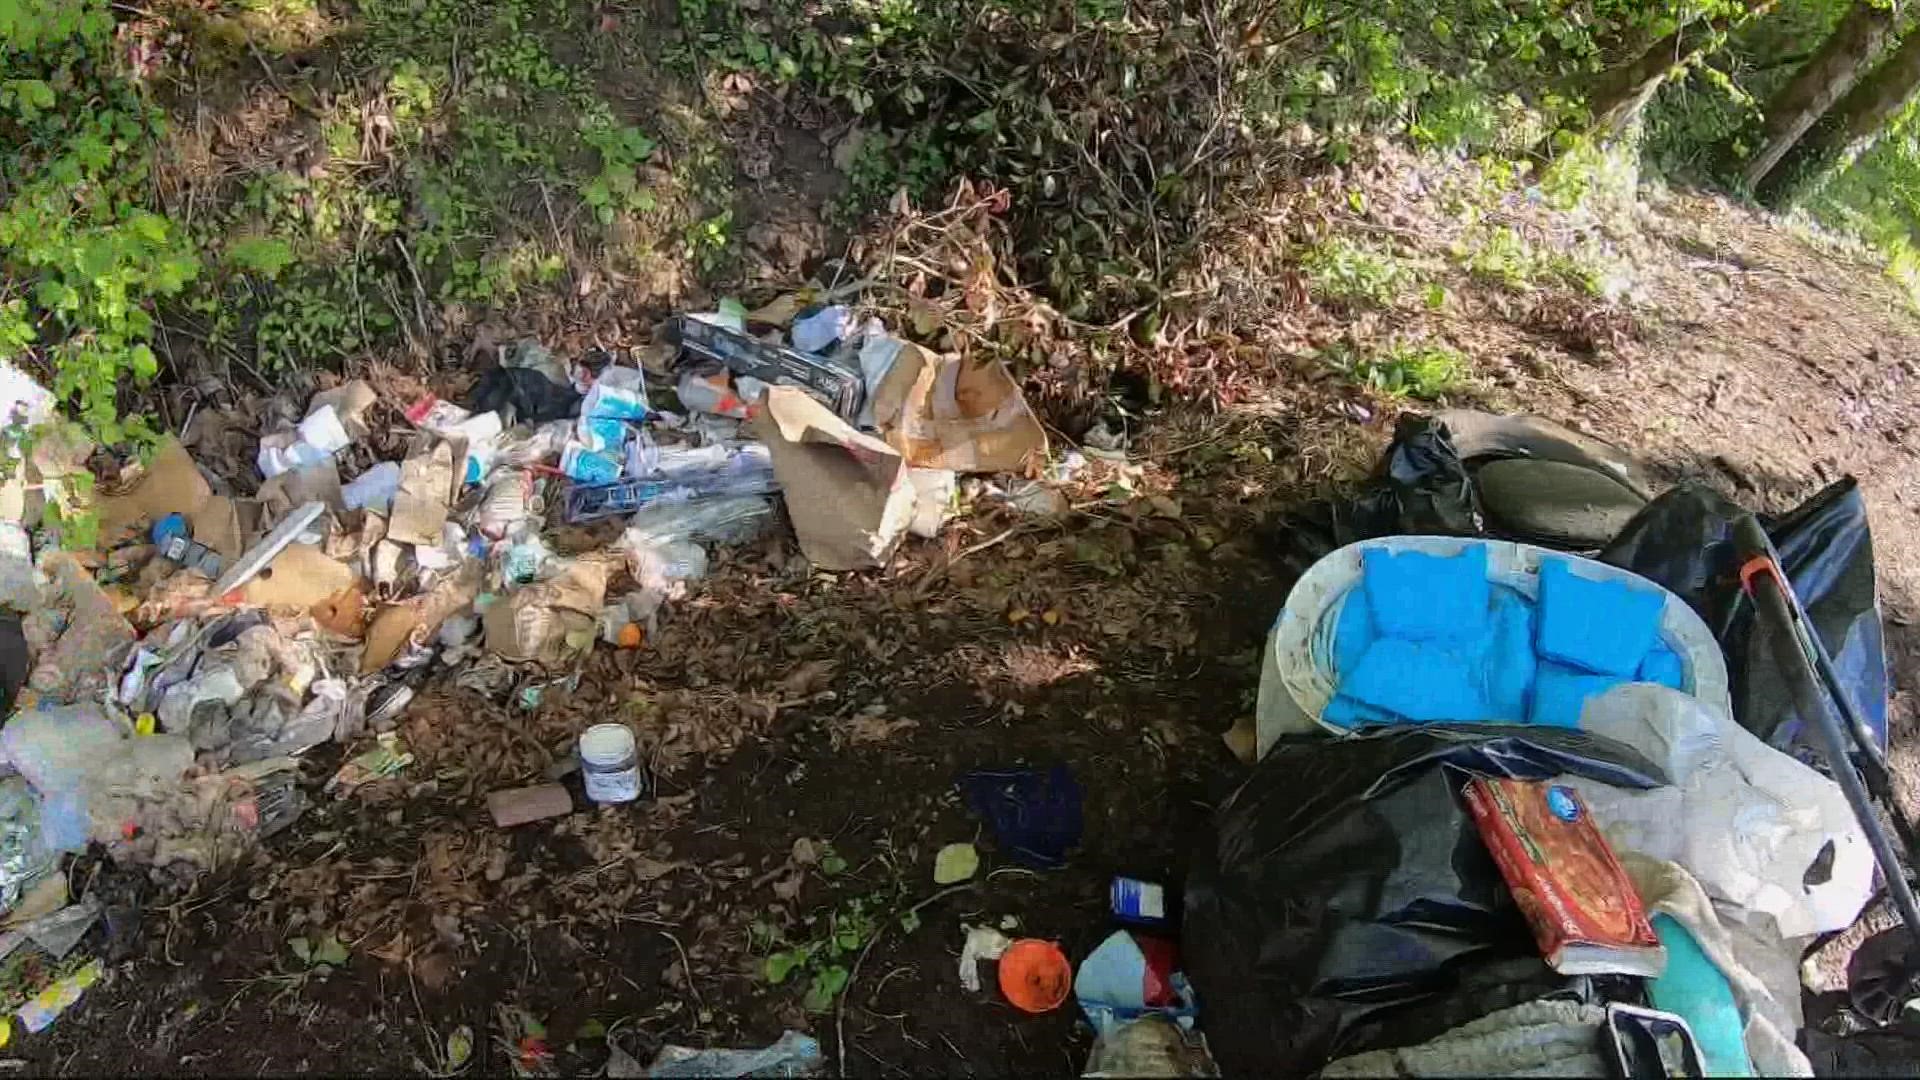 Mayor Ted Wheeler said that he has a plan to address the piles of trash left behind by rampant illegal dumping.